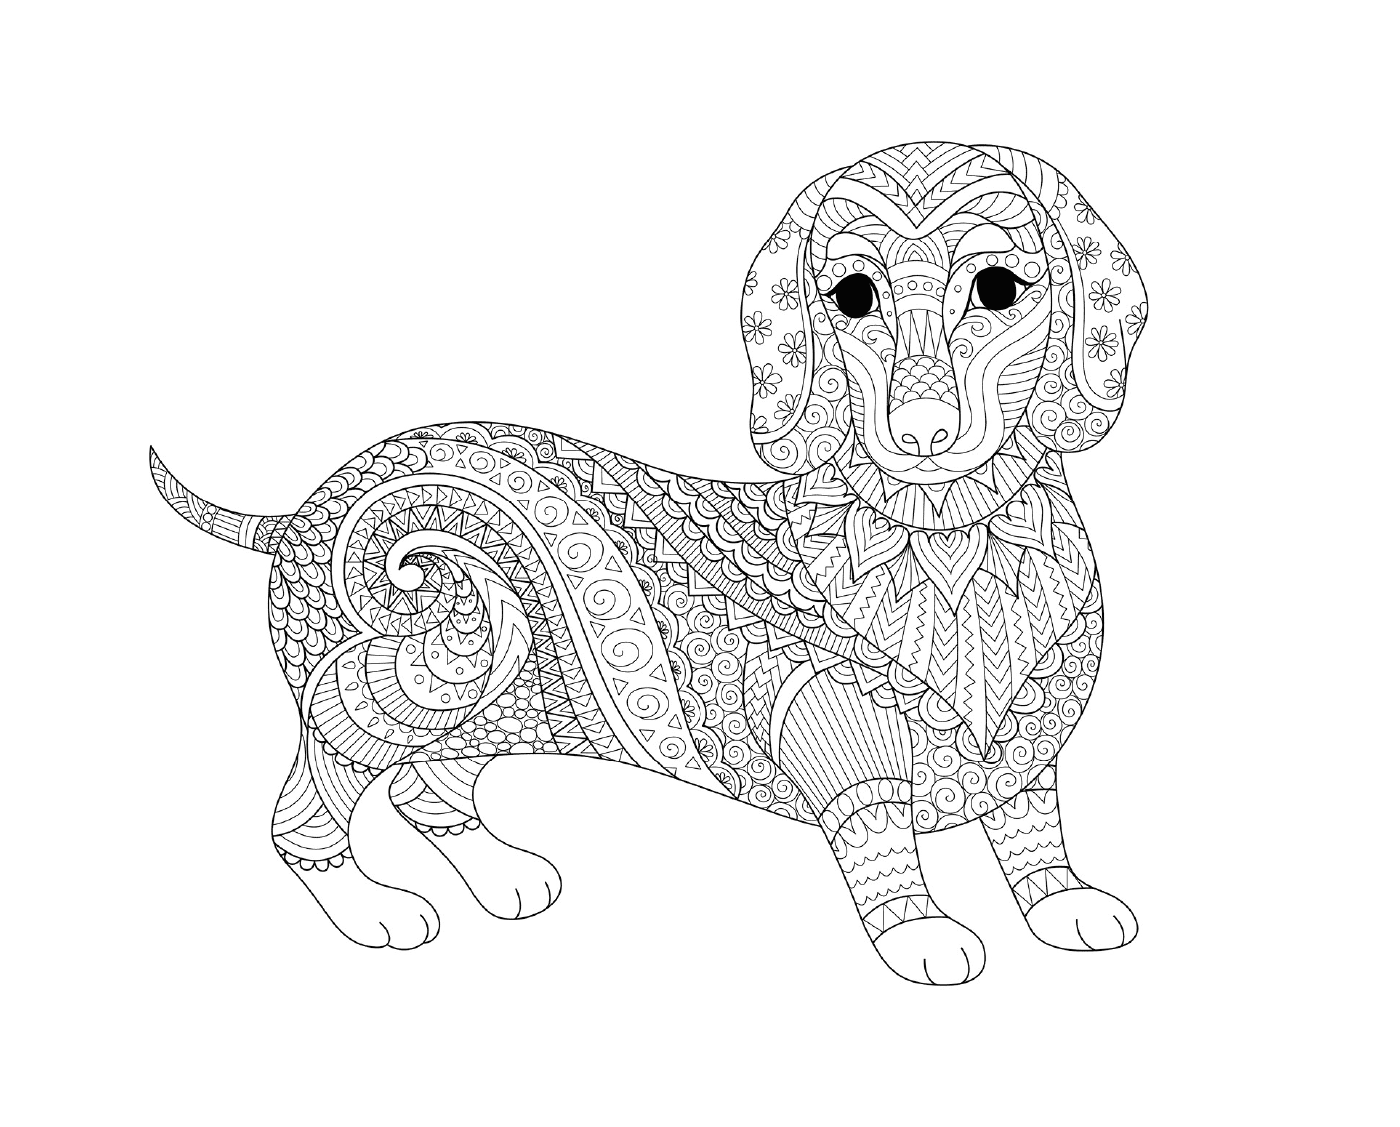  An adult teckel dog in a zentangle style 